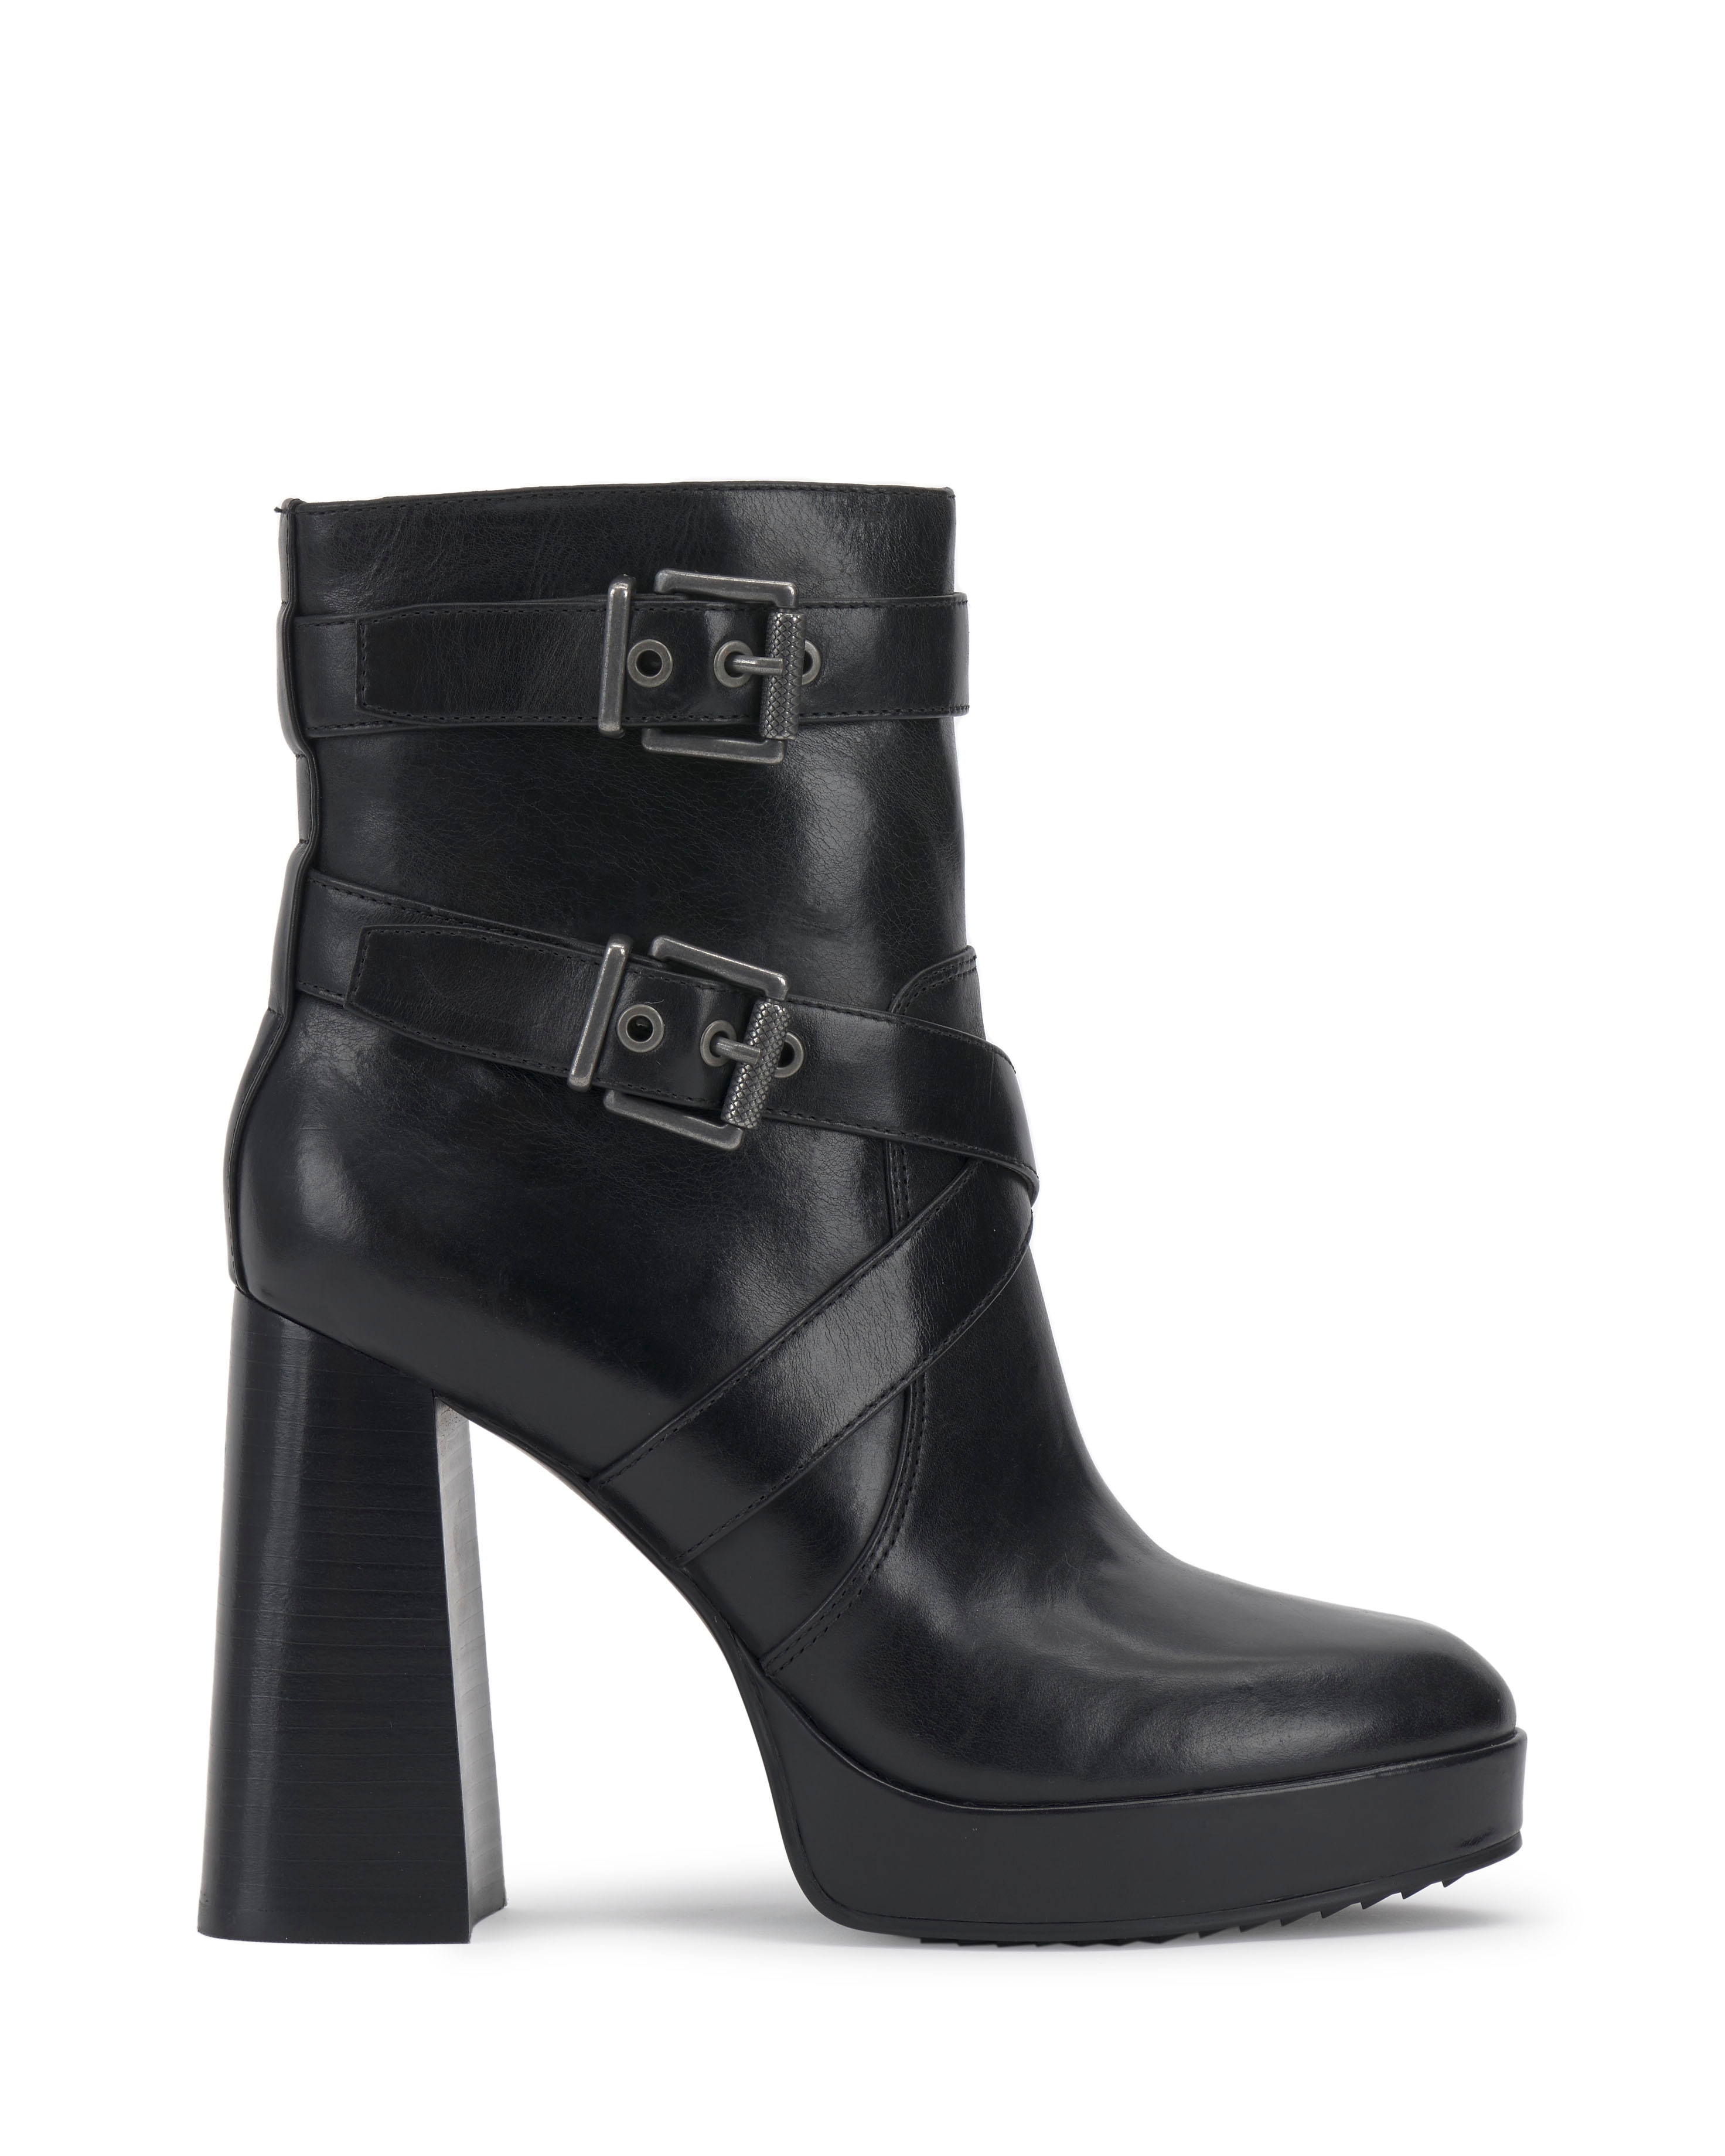 Vince Camuto Coliana Bootie